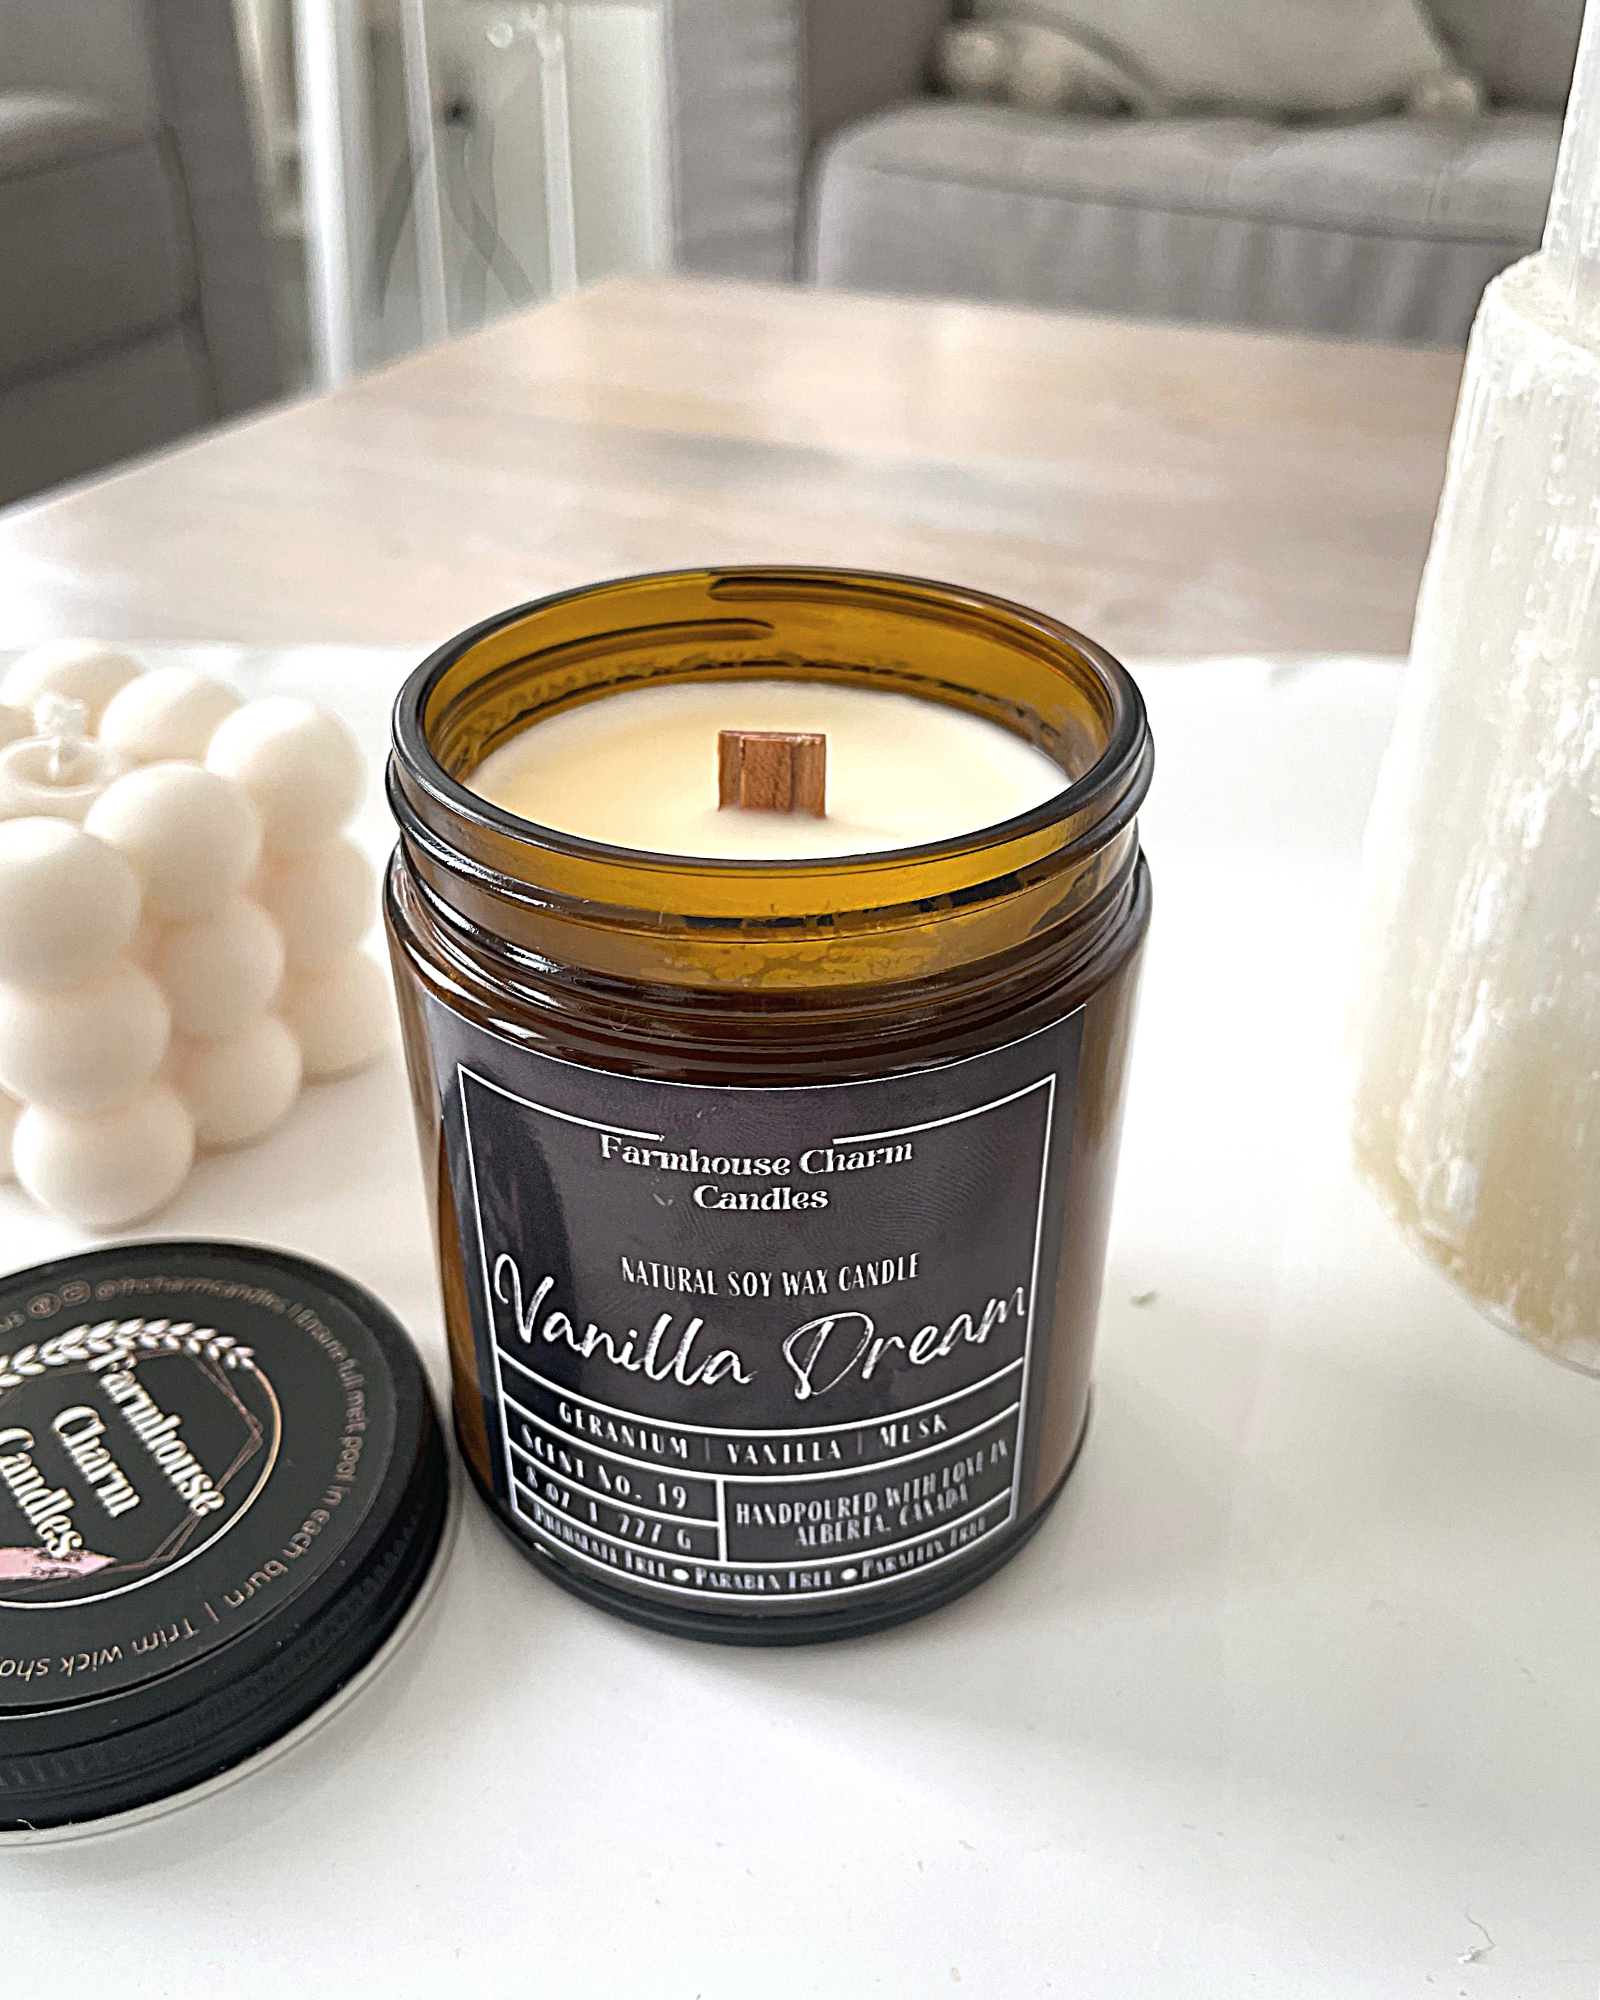 Experience the luxurious aroma of Vanilla Dream- Farmhouse Charm Soy Candle. Step up your candle game with this unique vanilla fragrance that will not disappoint. Indulge in a dreamy and lavish scent that awakens your senses with a blend of toasted vanilla, sweet geranium florals, and a touch of musk.  size: 8 oz (227 g)  The candle is hand poured with love in Alberta, Canada. It has an approximate burn time of 50 hours.